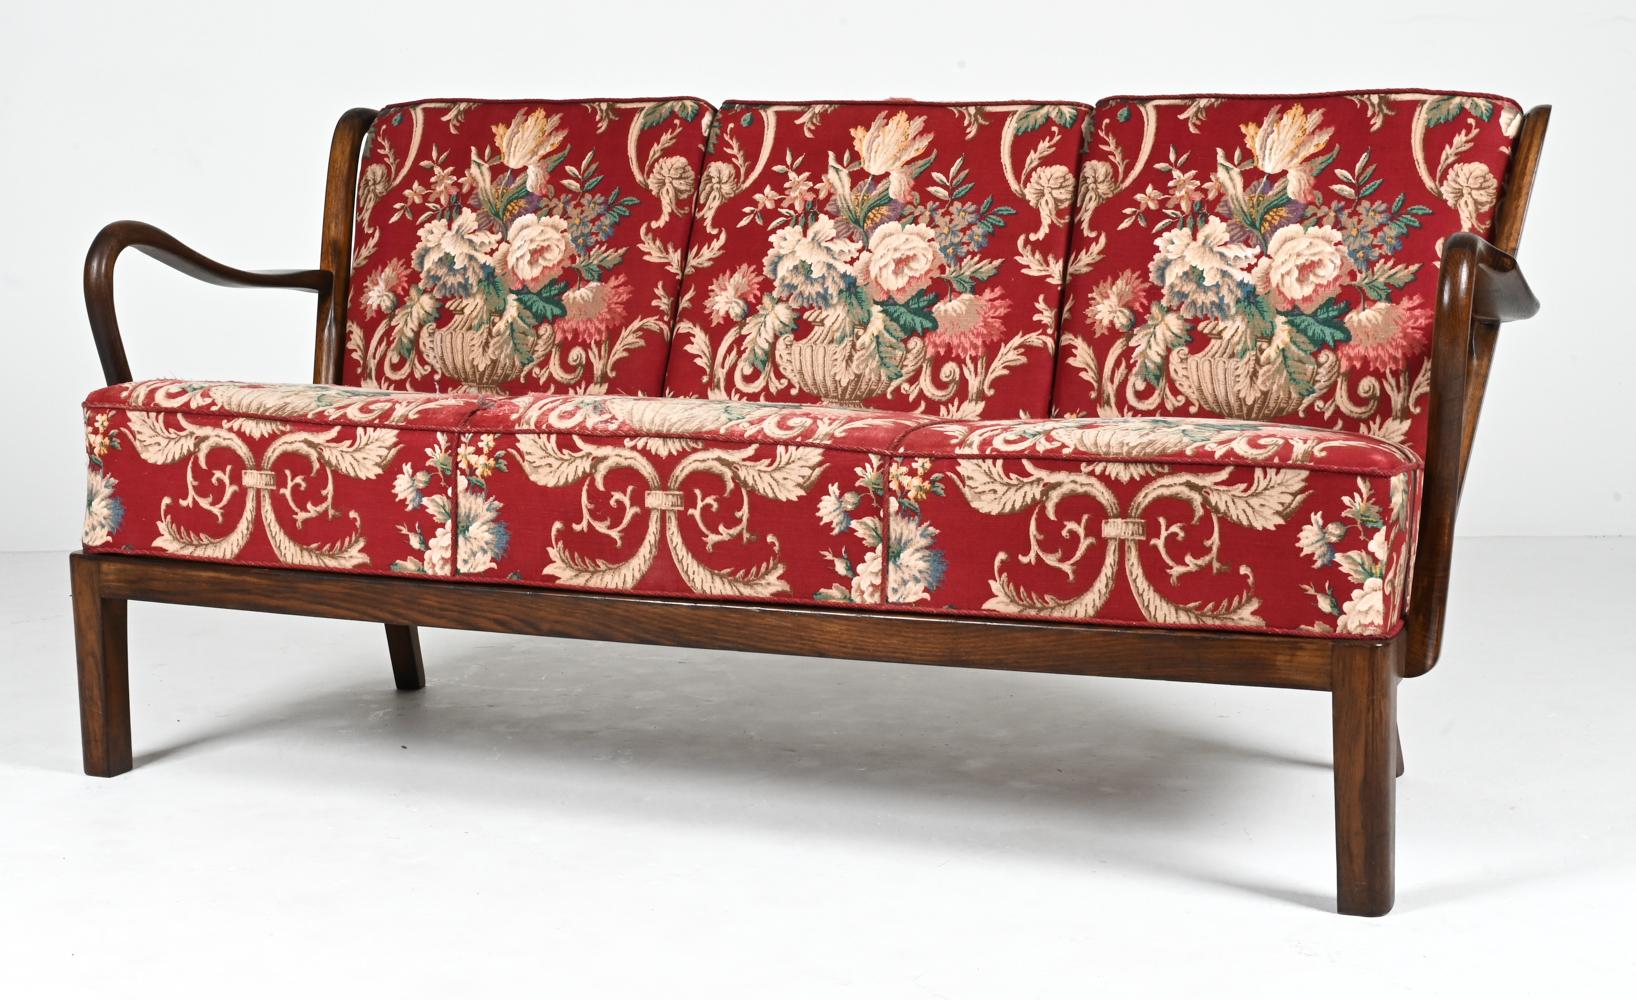 Step into the enchanting world of Danish craftsmanship with this exquisite Danish 1940s Open Arms Sofa, a masterpiece in carved beech wood designed by the skilled artisan Alfred Christensen. With its captivating blend of timeless design and